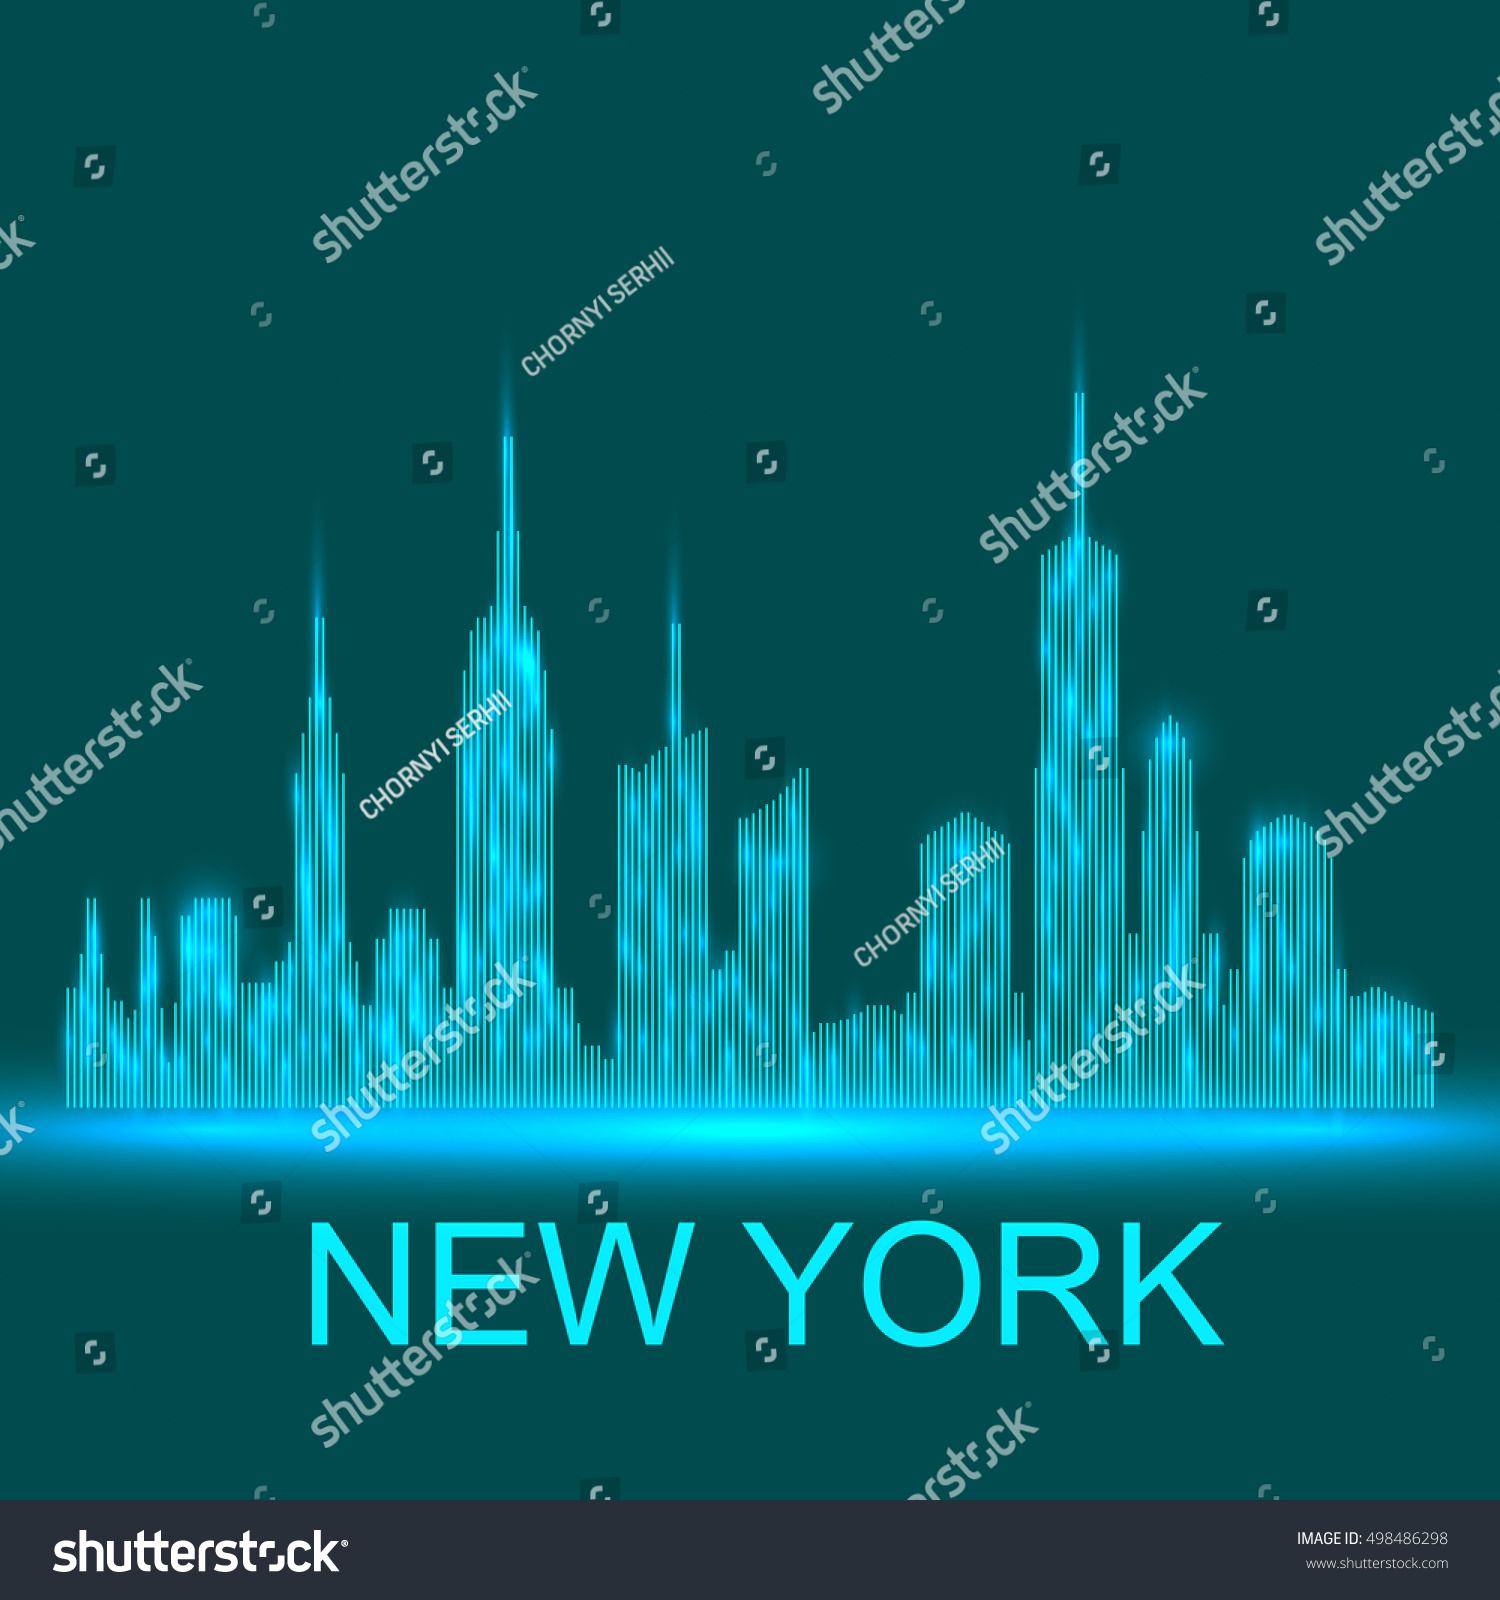 Technology image of New York. The concept vector illustration eps10. Abstract background. #498486298